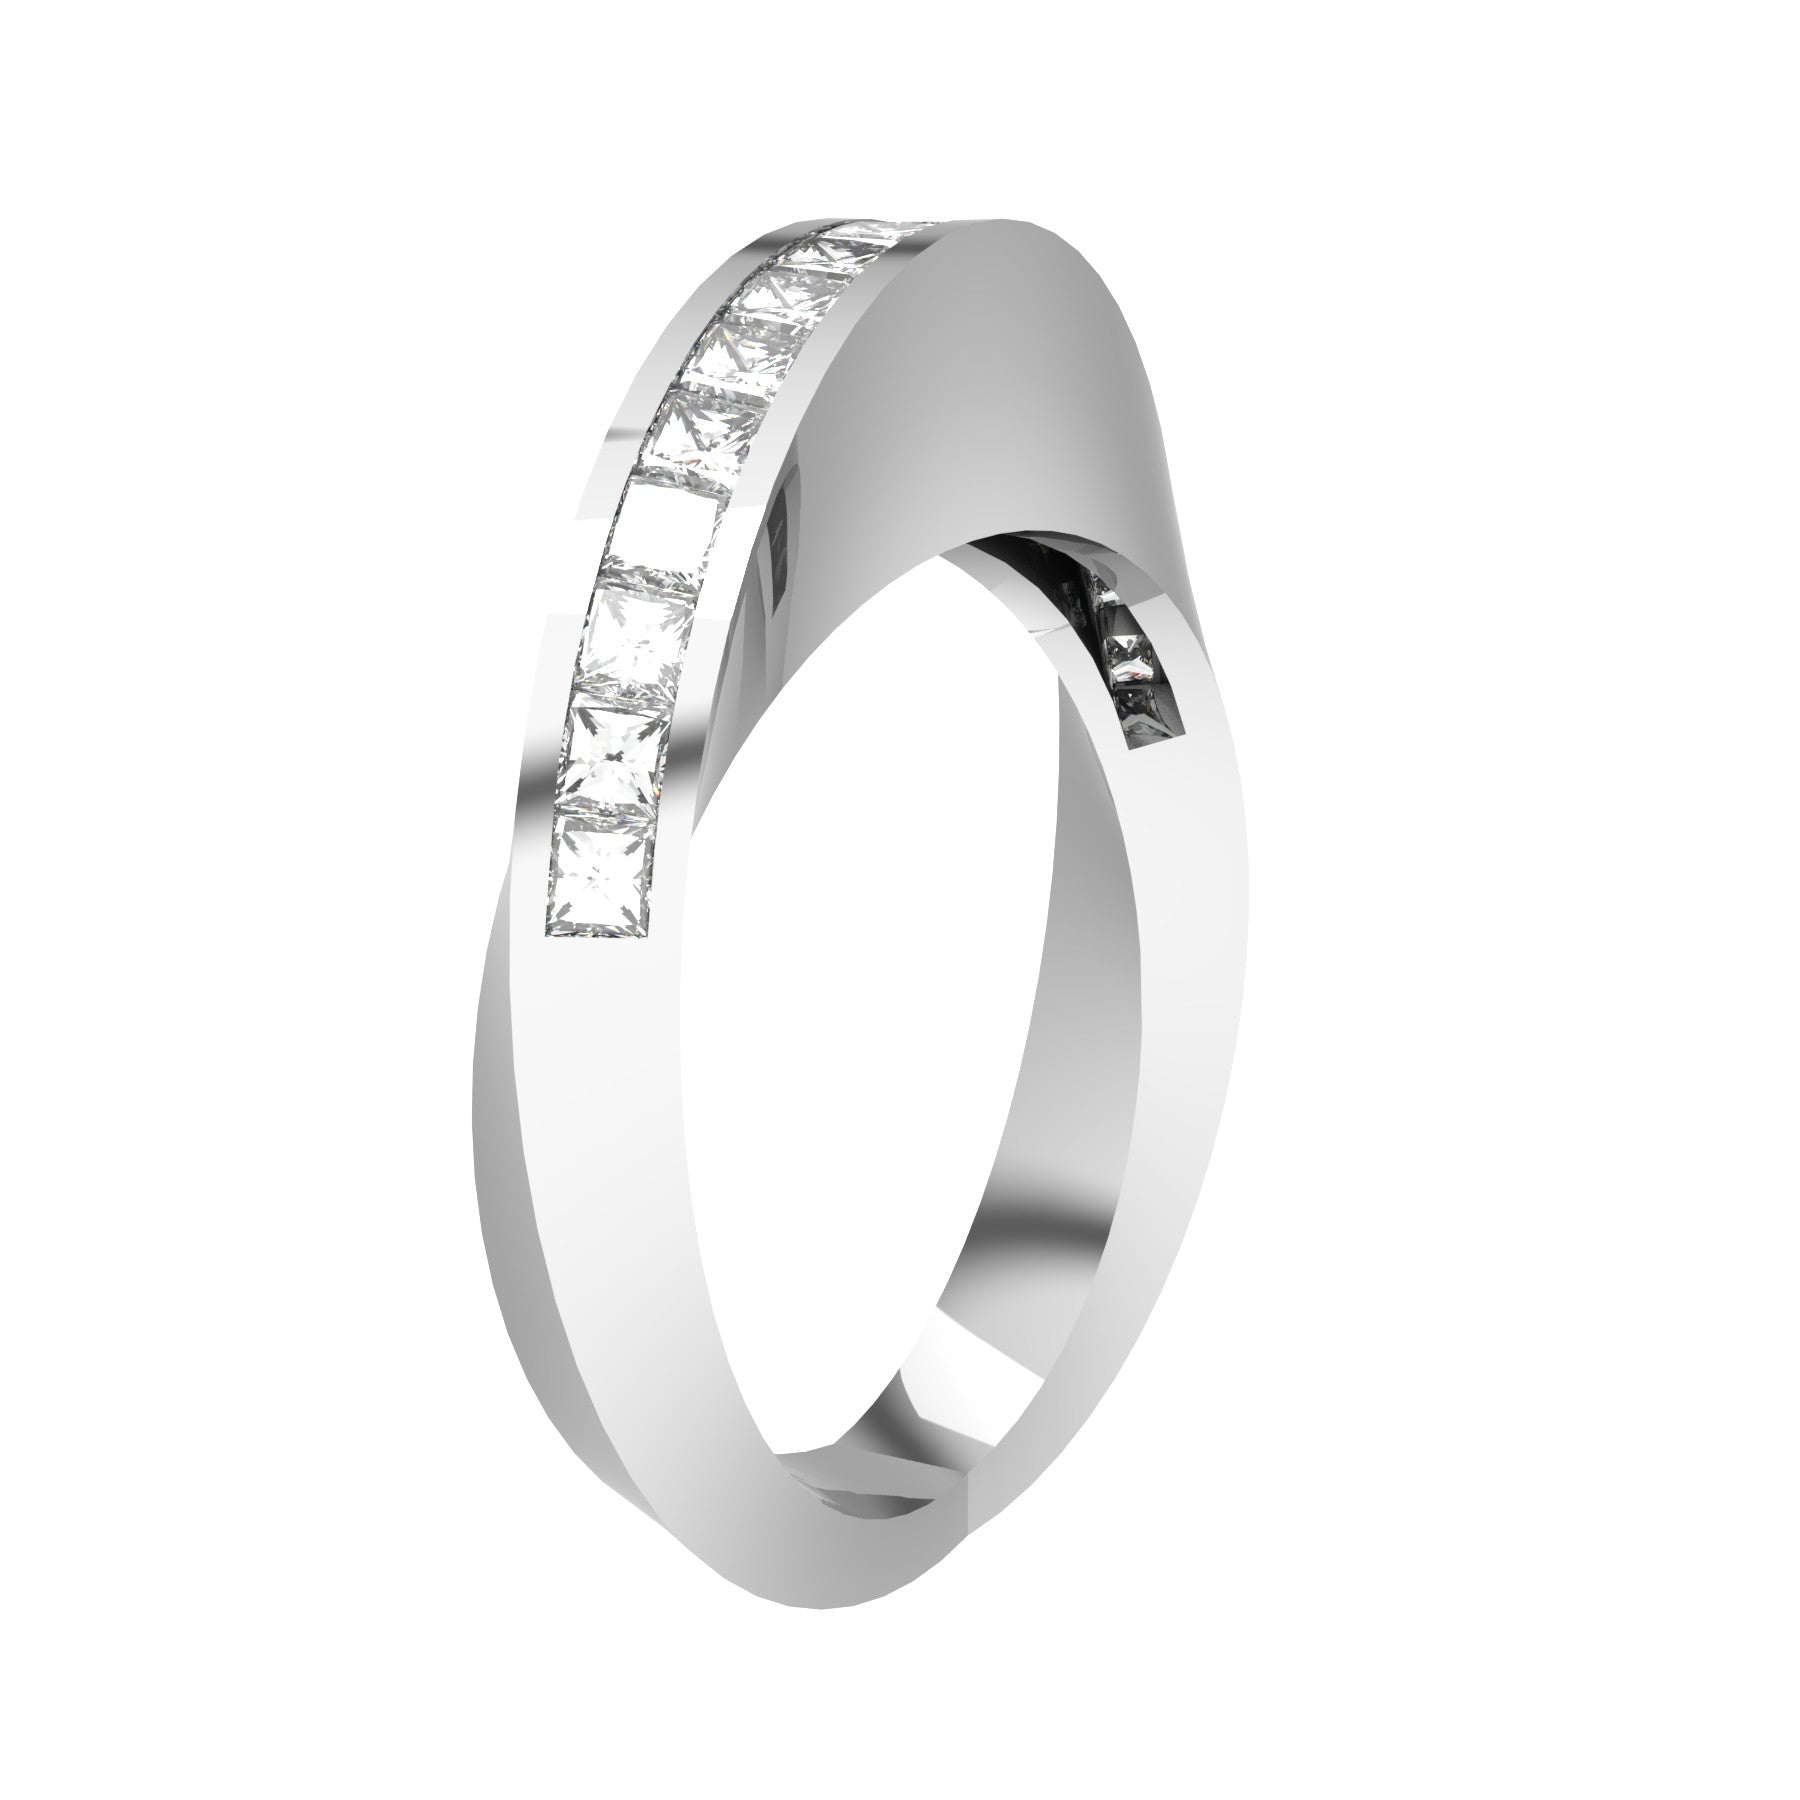 crazy ribbon ring, 18 K white gold, 18 square natural diamonds, about 0,90 ct, weight about 8,8 g (0.31 oz) width 3 mm